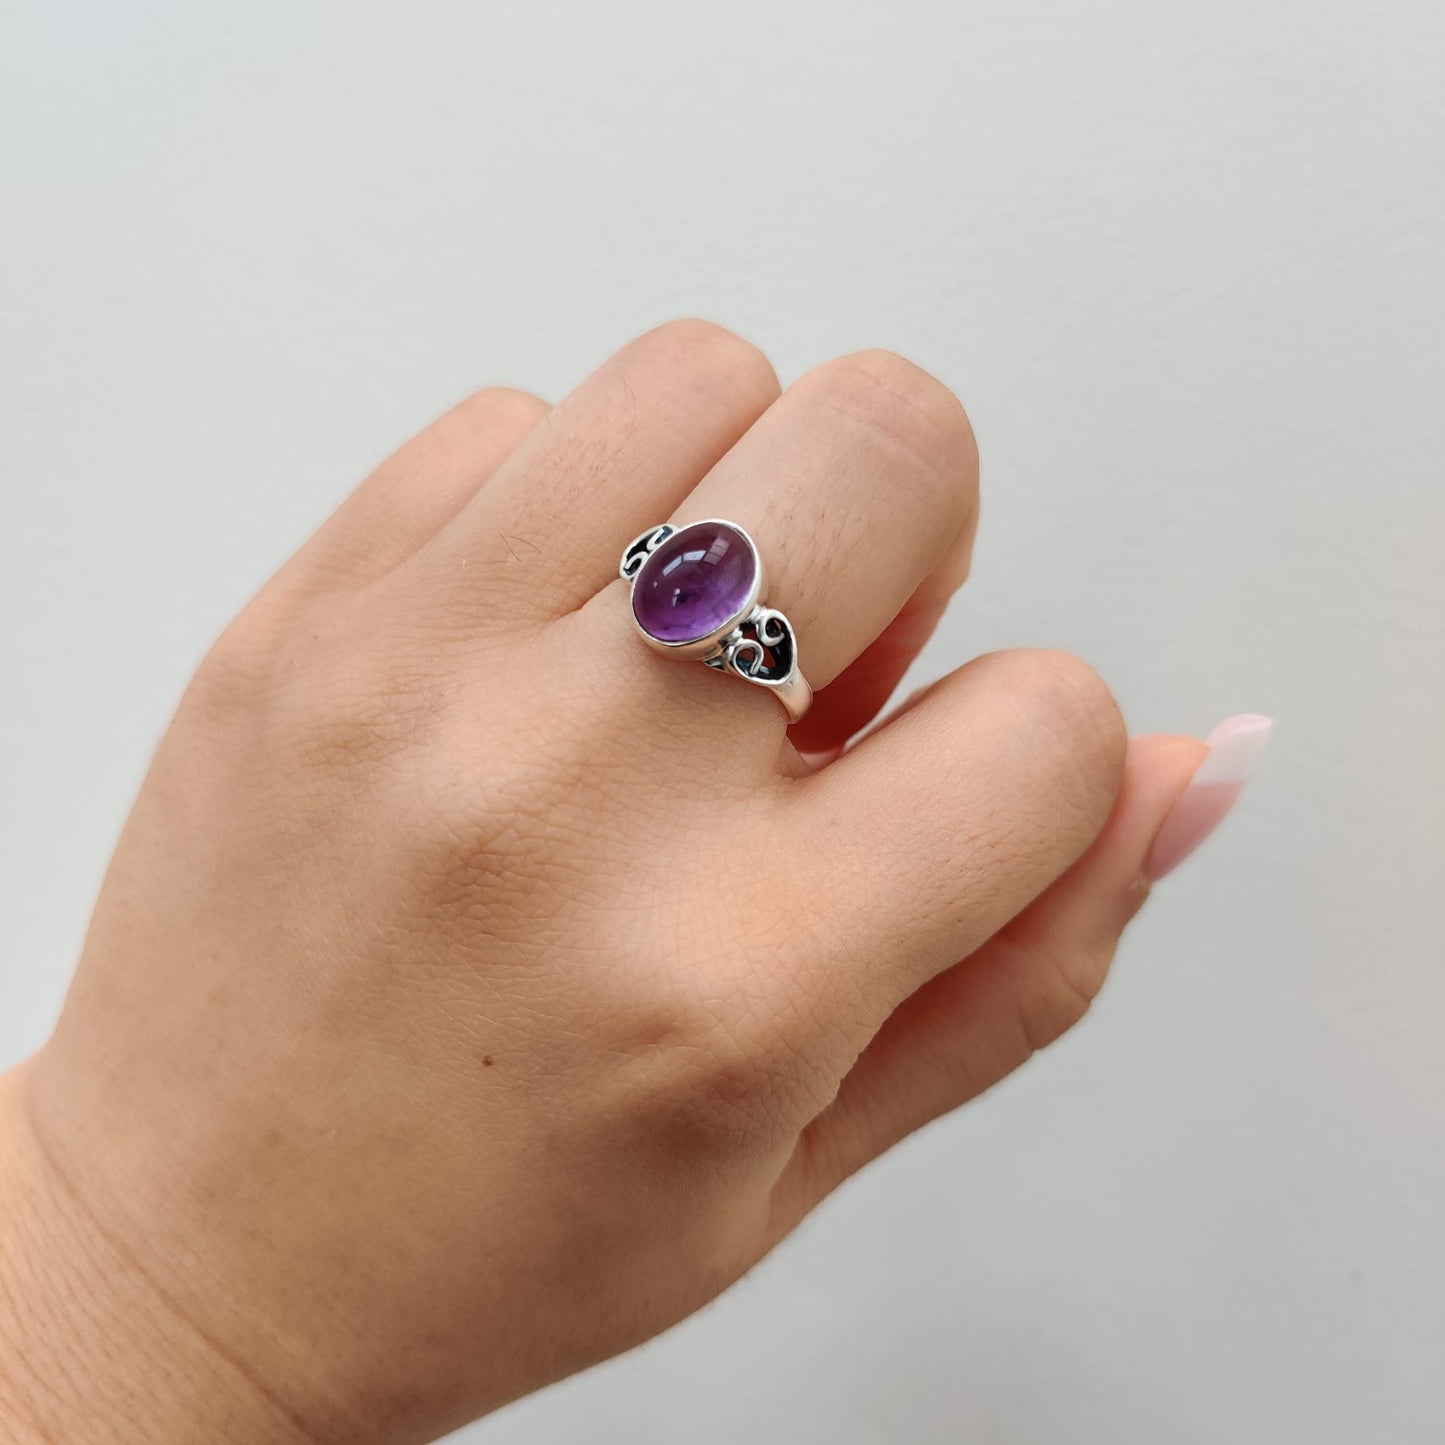 Amethyst Oval 925 Sterling Silver Ring with Heart Design - Rivendell Shop